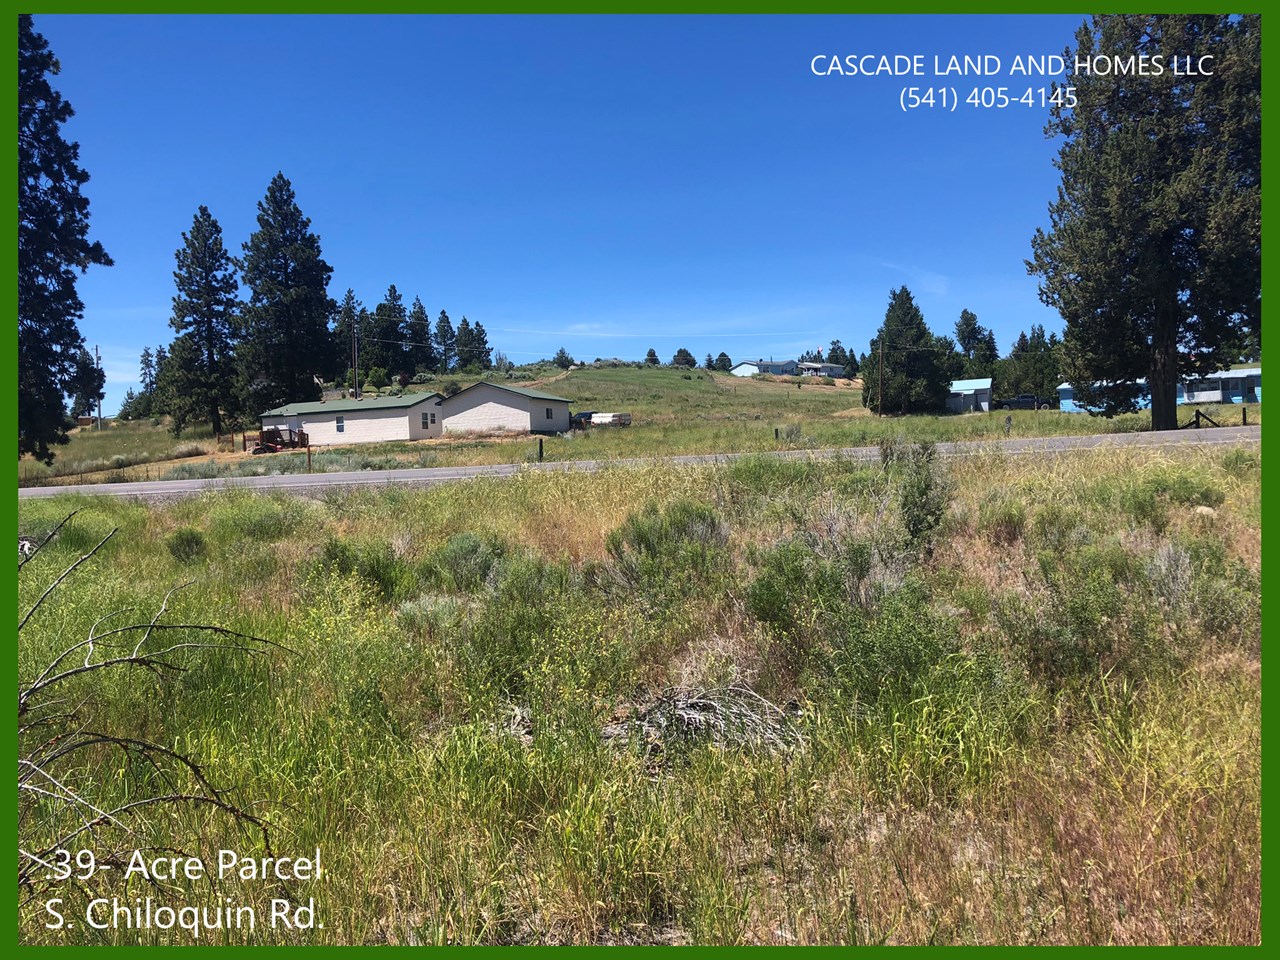 this parcel sits just outside the subdivisions of agency lake on the paved road. power is nearby, it will need a well and septic. s. chiloquin road is a paved county maintained road.